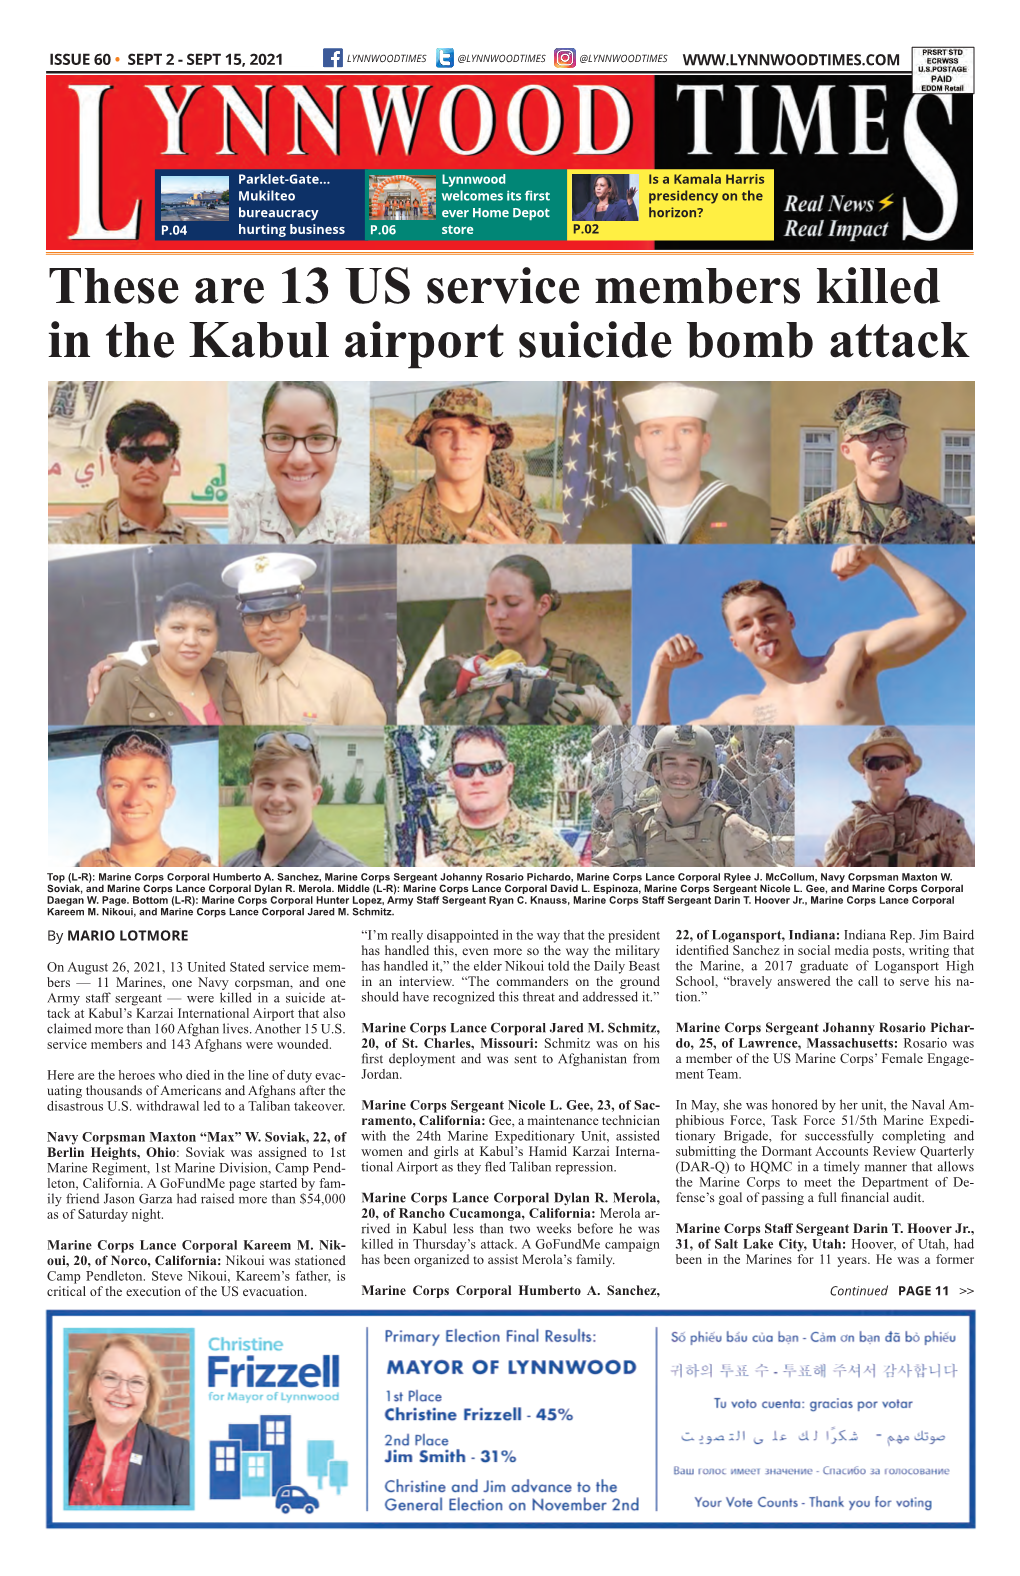 These Are 13 US Service Members Killed in the Kabul Airport Suicide Bomb Attack